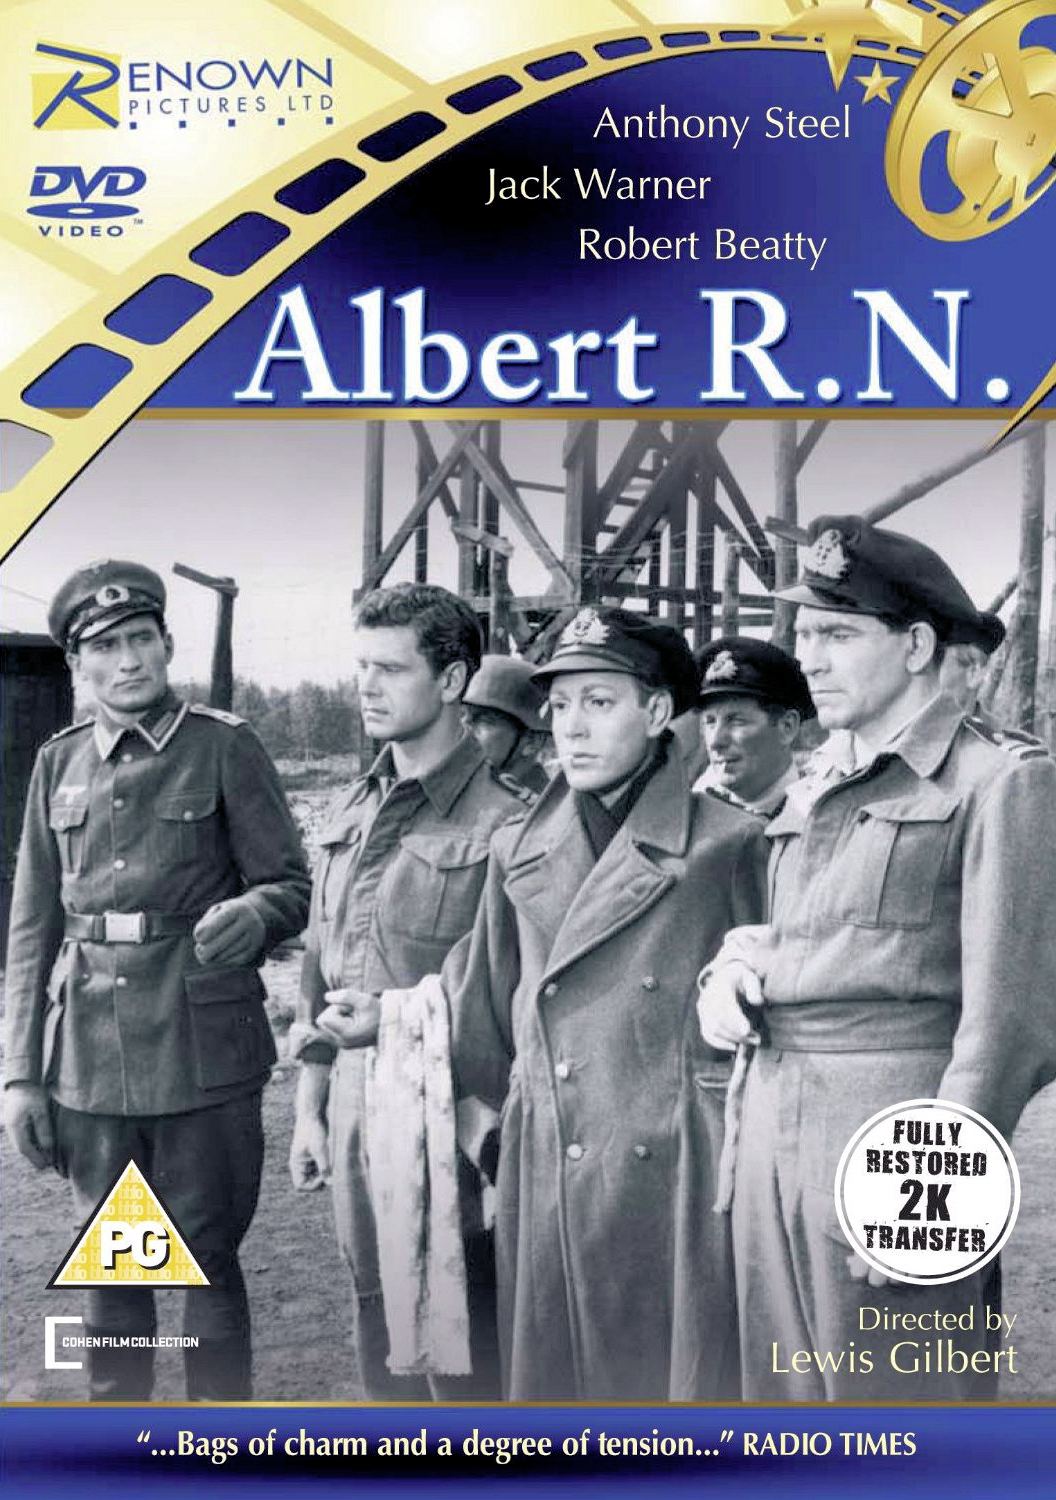 Albert R.N. DVD from Renown Pictures